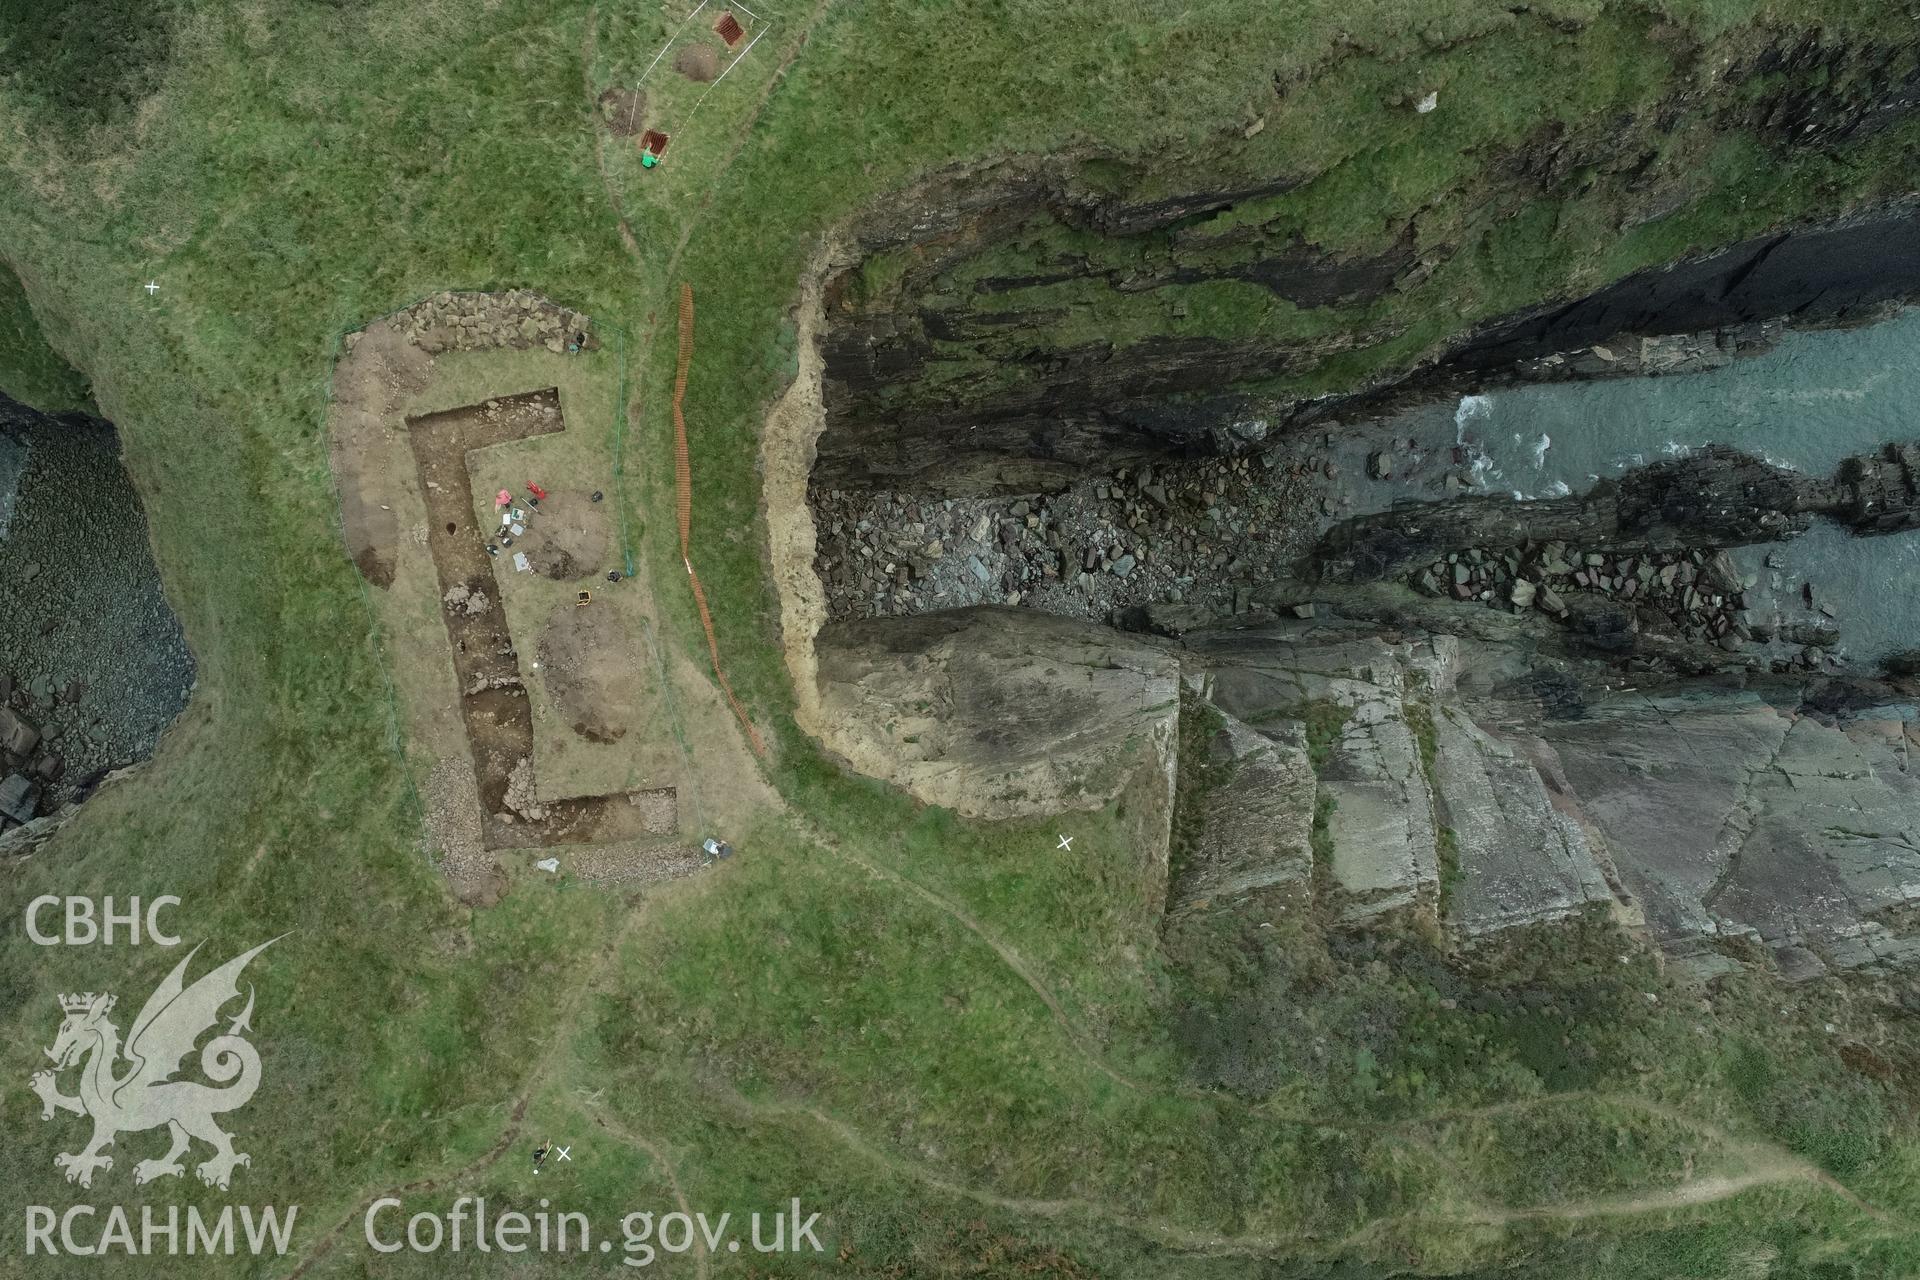 Aerial shot of excavations at Caerfai Taken by Louise Barker. Produced with EU funds through the Ireland Wales Co-operation Programme 2014-2023. All material made freely available through the Open Government Licence.